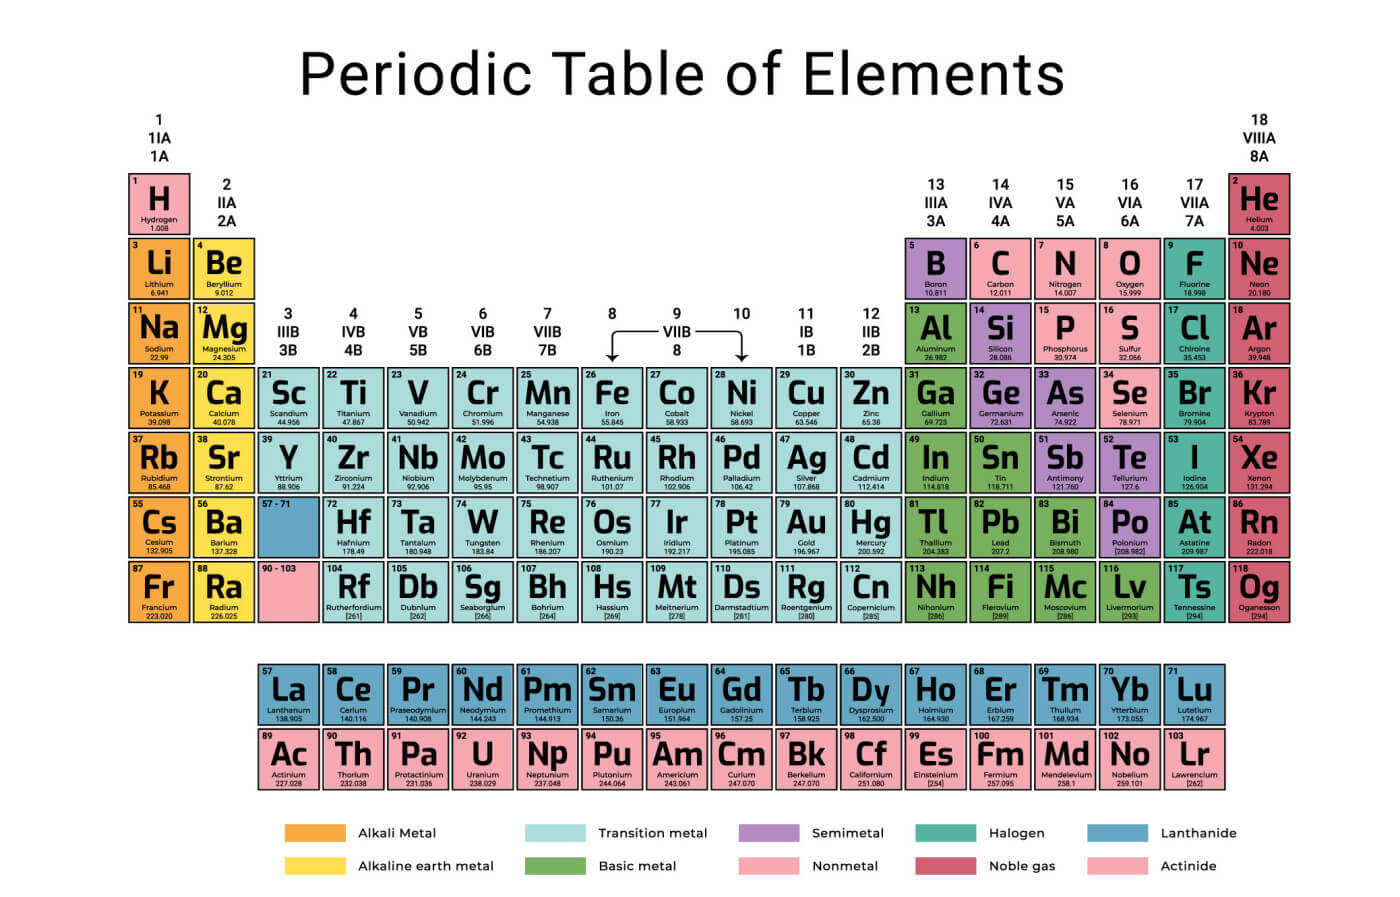 Properties of the Basic Metals Element Group